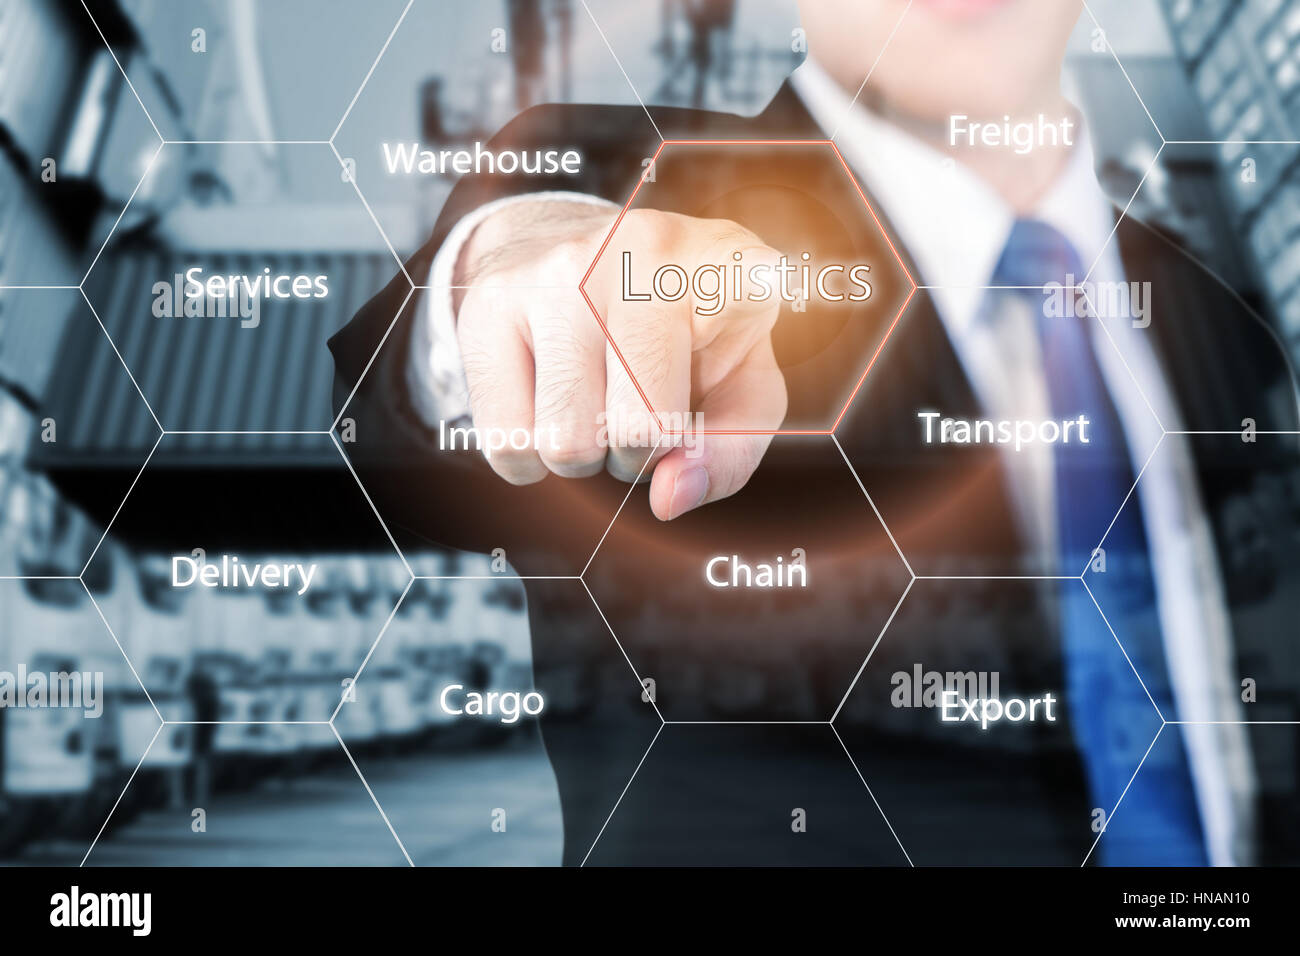 Logistics concept with businessman hand holding digital tablet shipping icons use for import, export and logistics background. Stock Photo